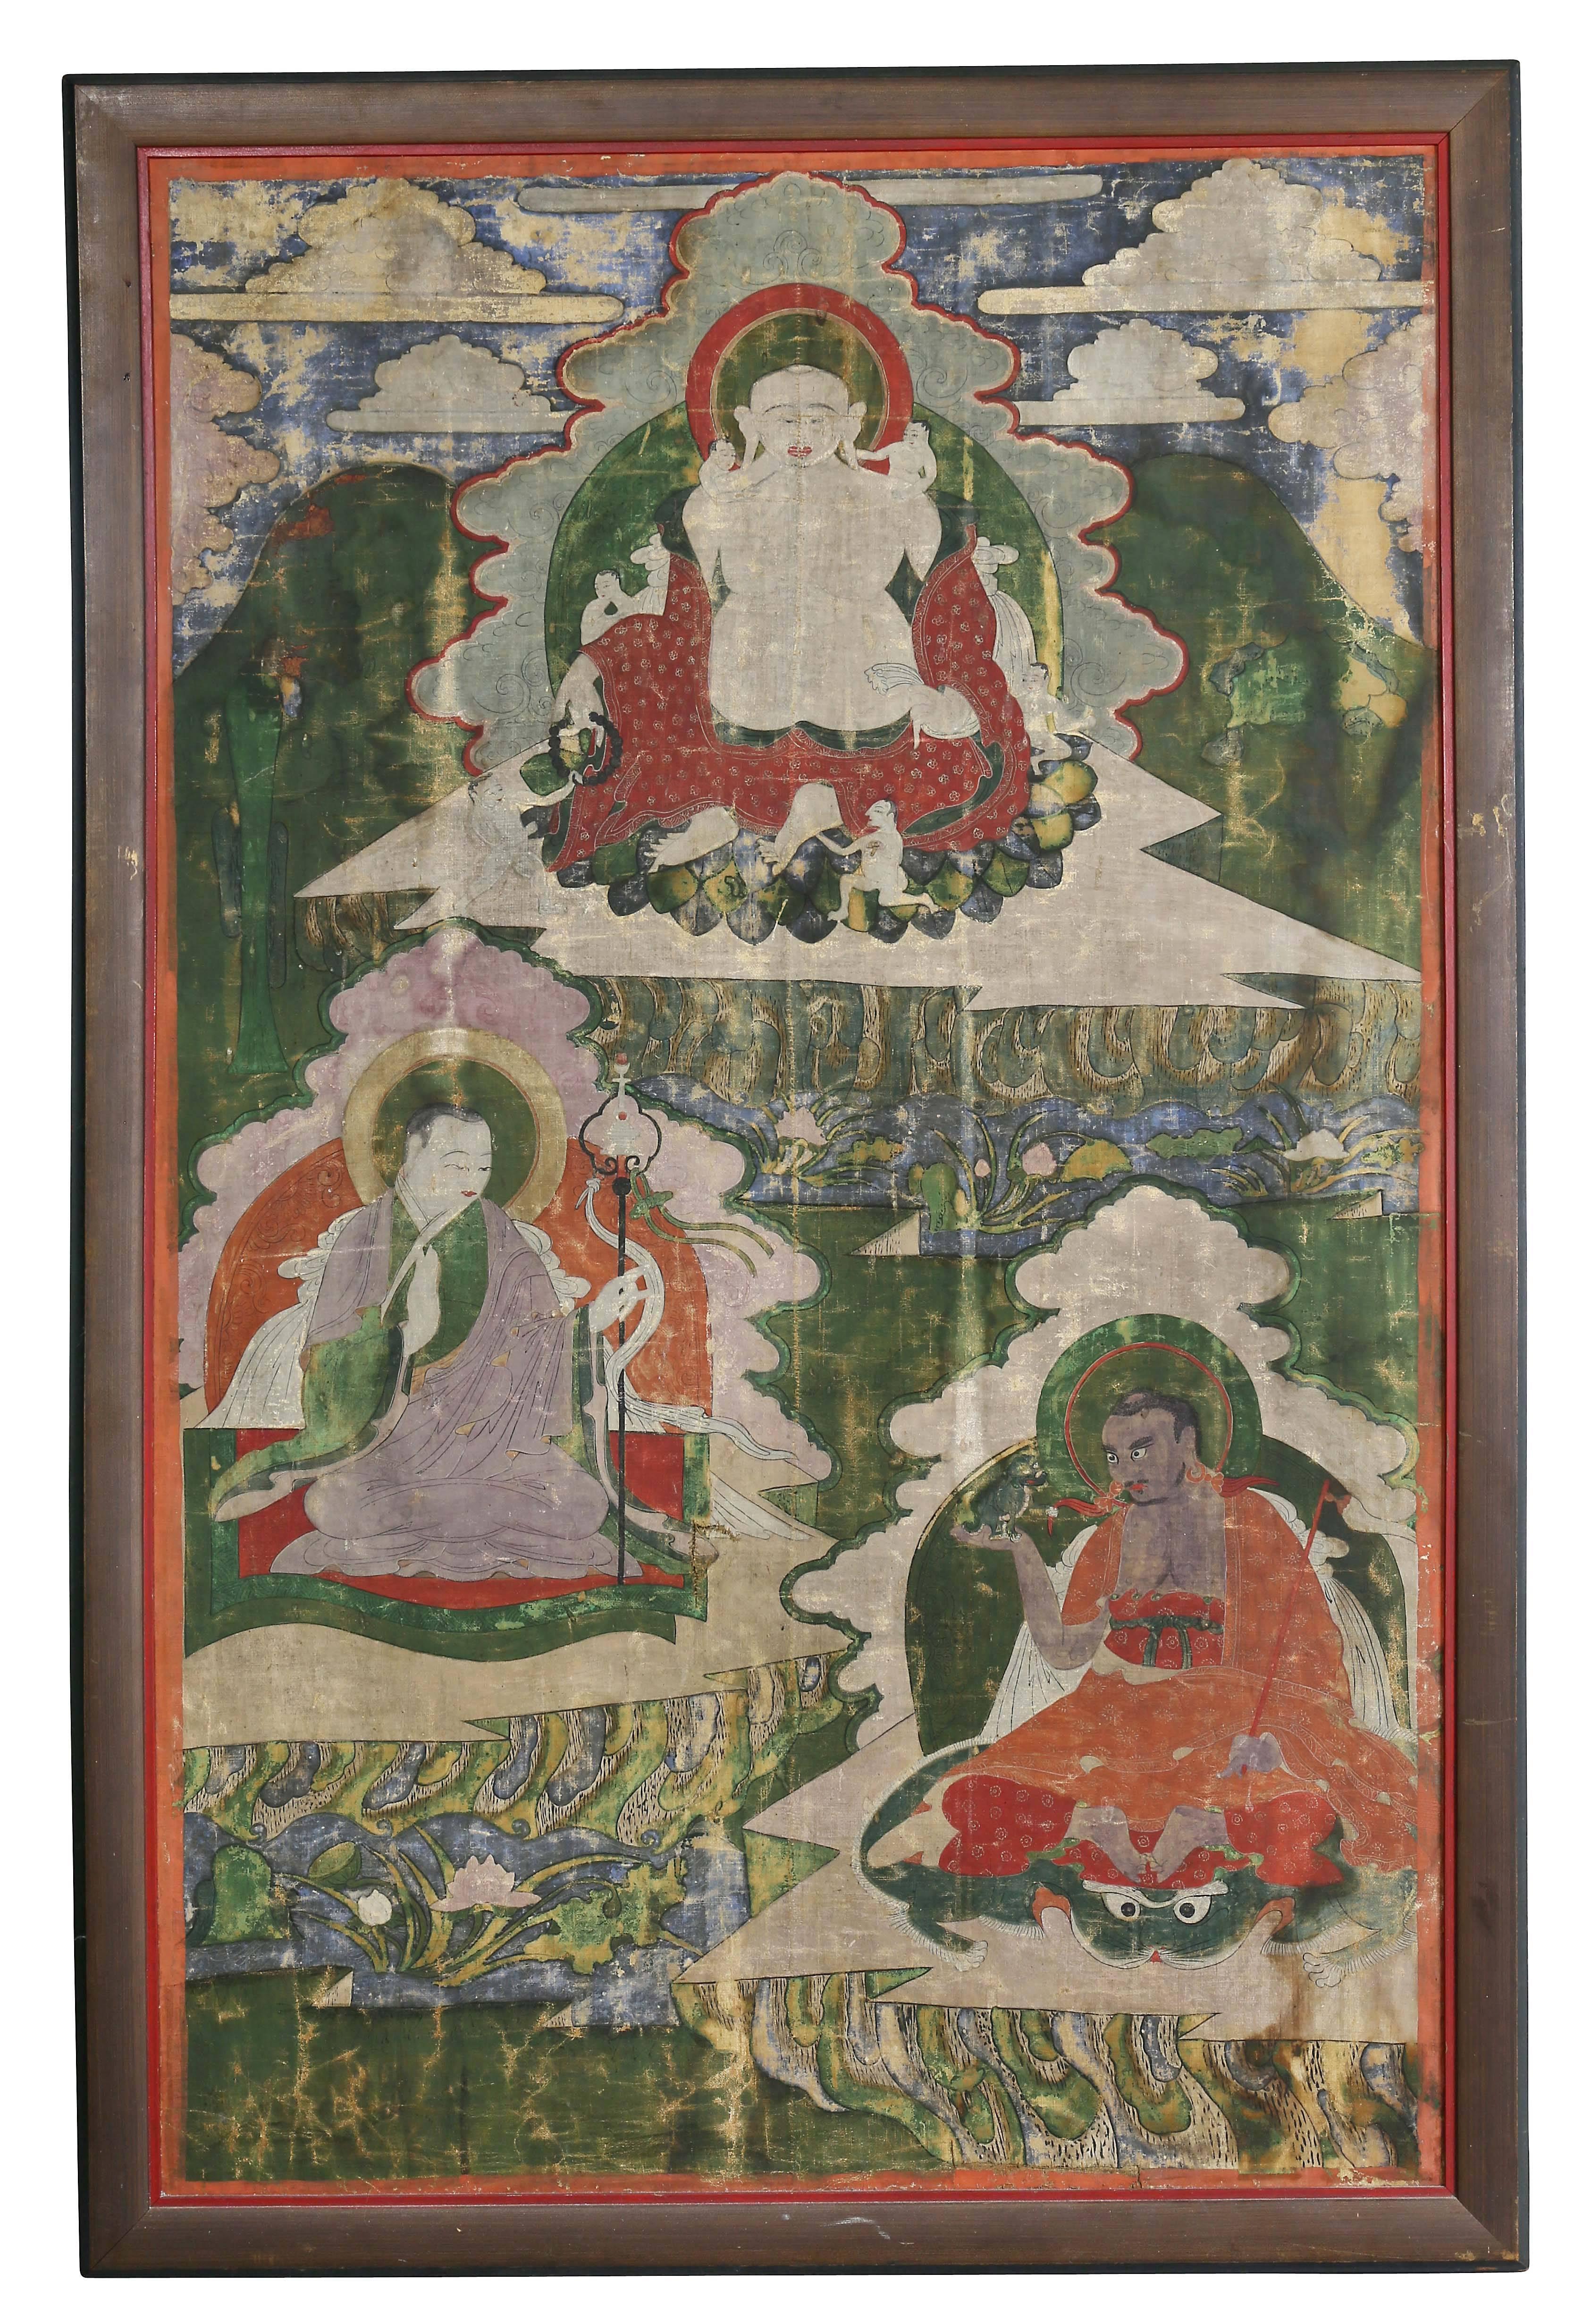 Each with Buddha’s in a green background.